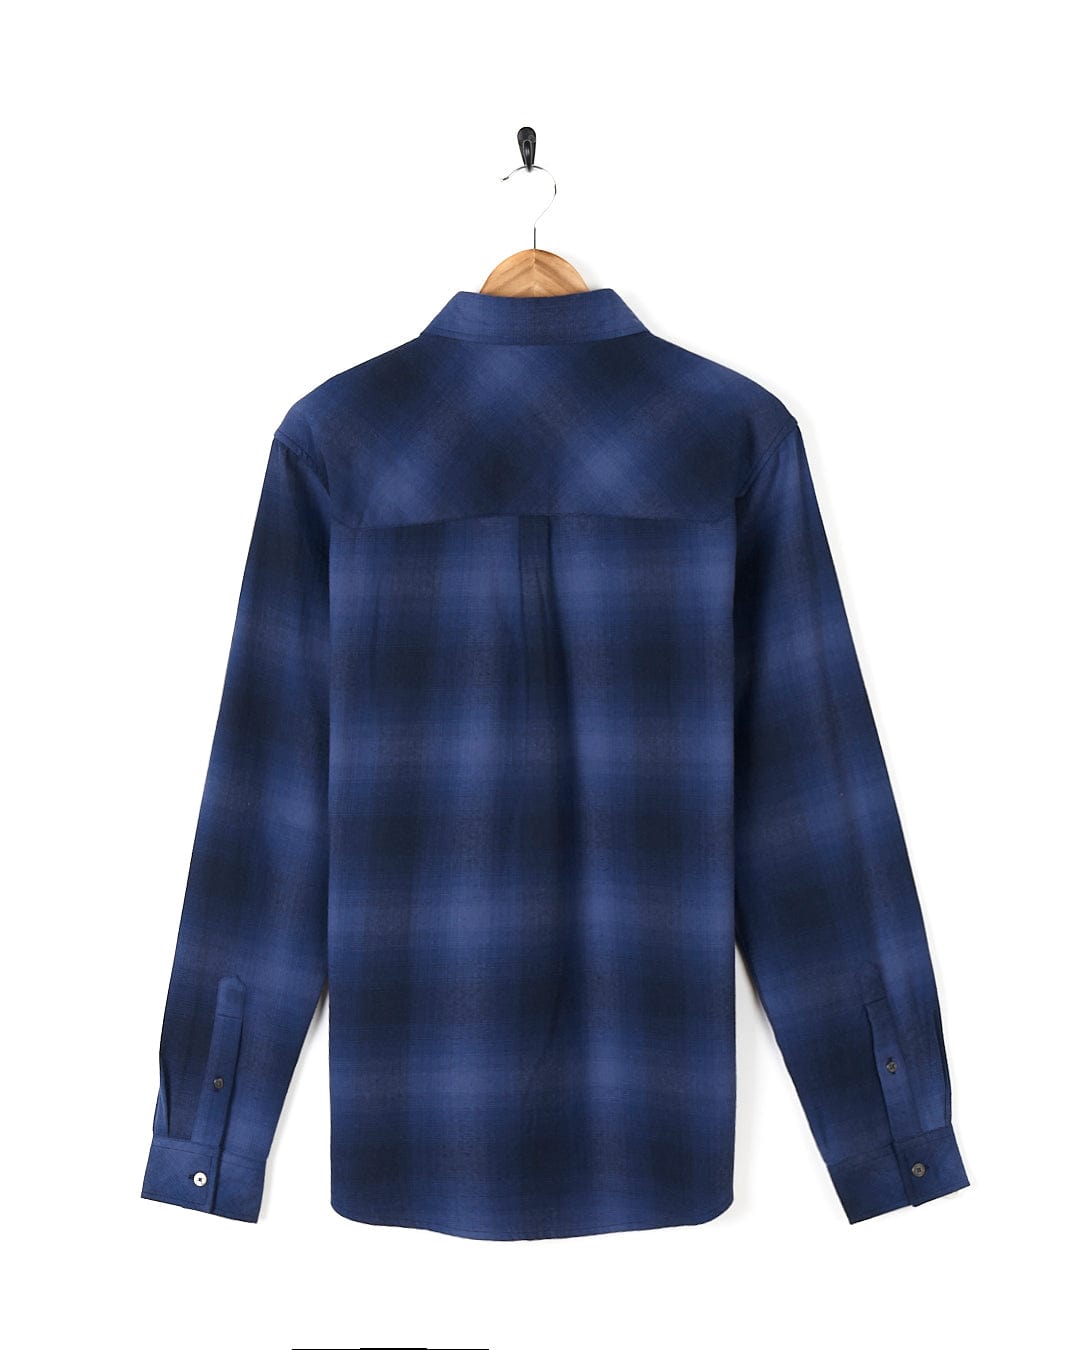 A Farris - Mens Check Shirt - Blue, made from 100% cotton fabric, hanging on a hanger. (Saltrock)